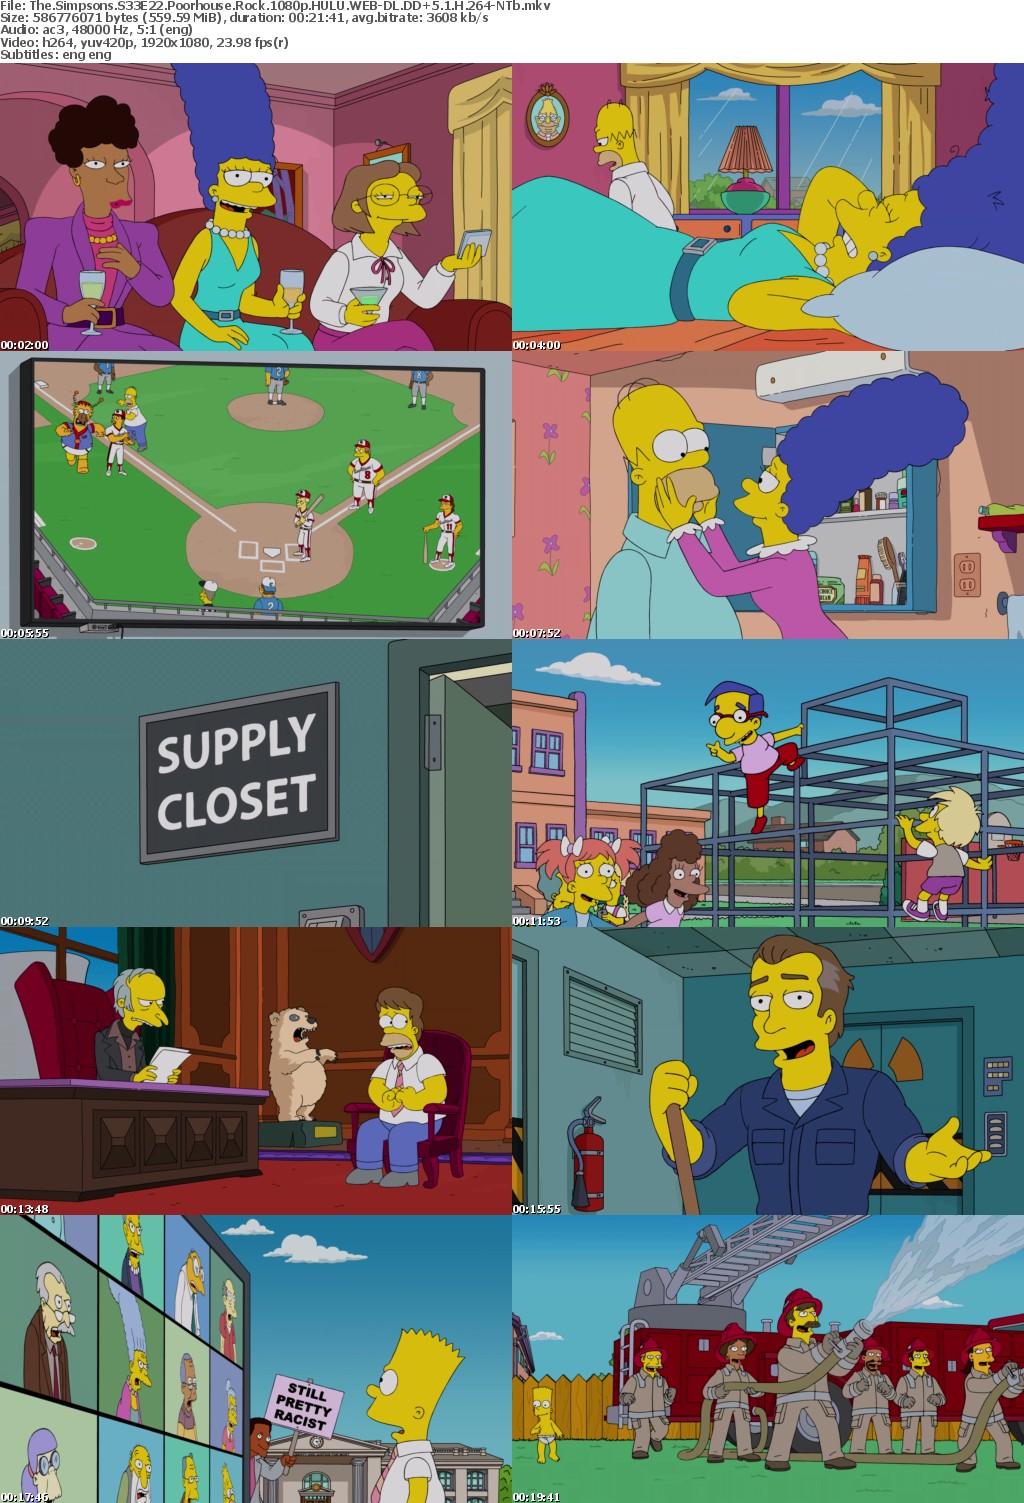 The Simpsons S33E22 Poorhouse Rock 1080p HULU WEBRip DDP5 1 x264-NTb